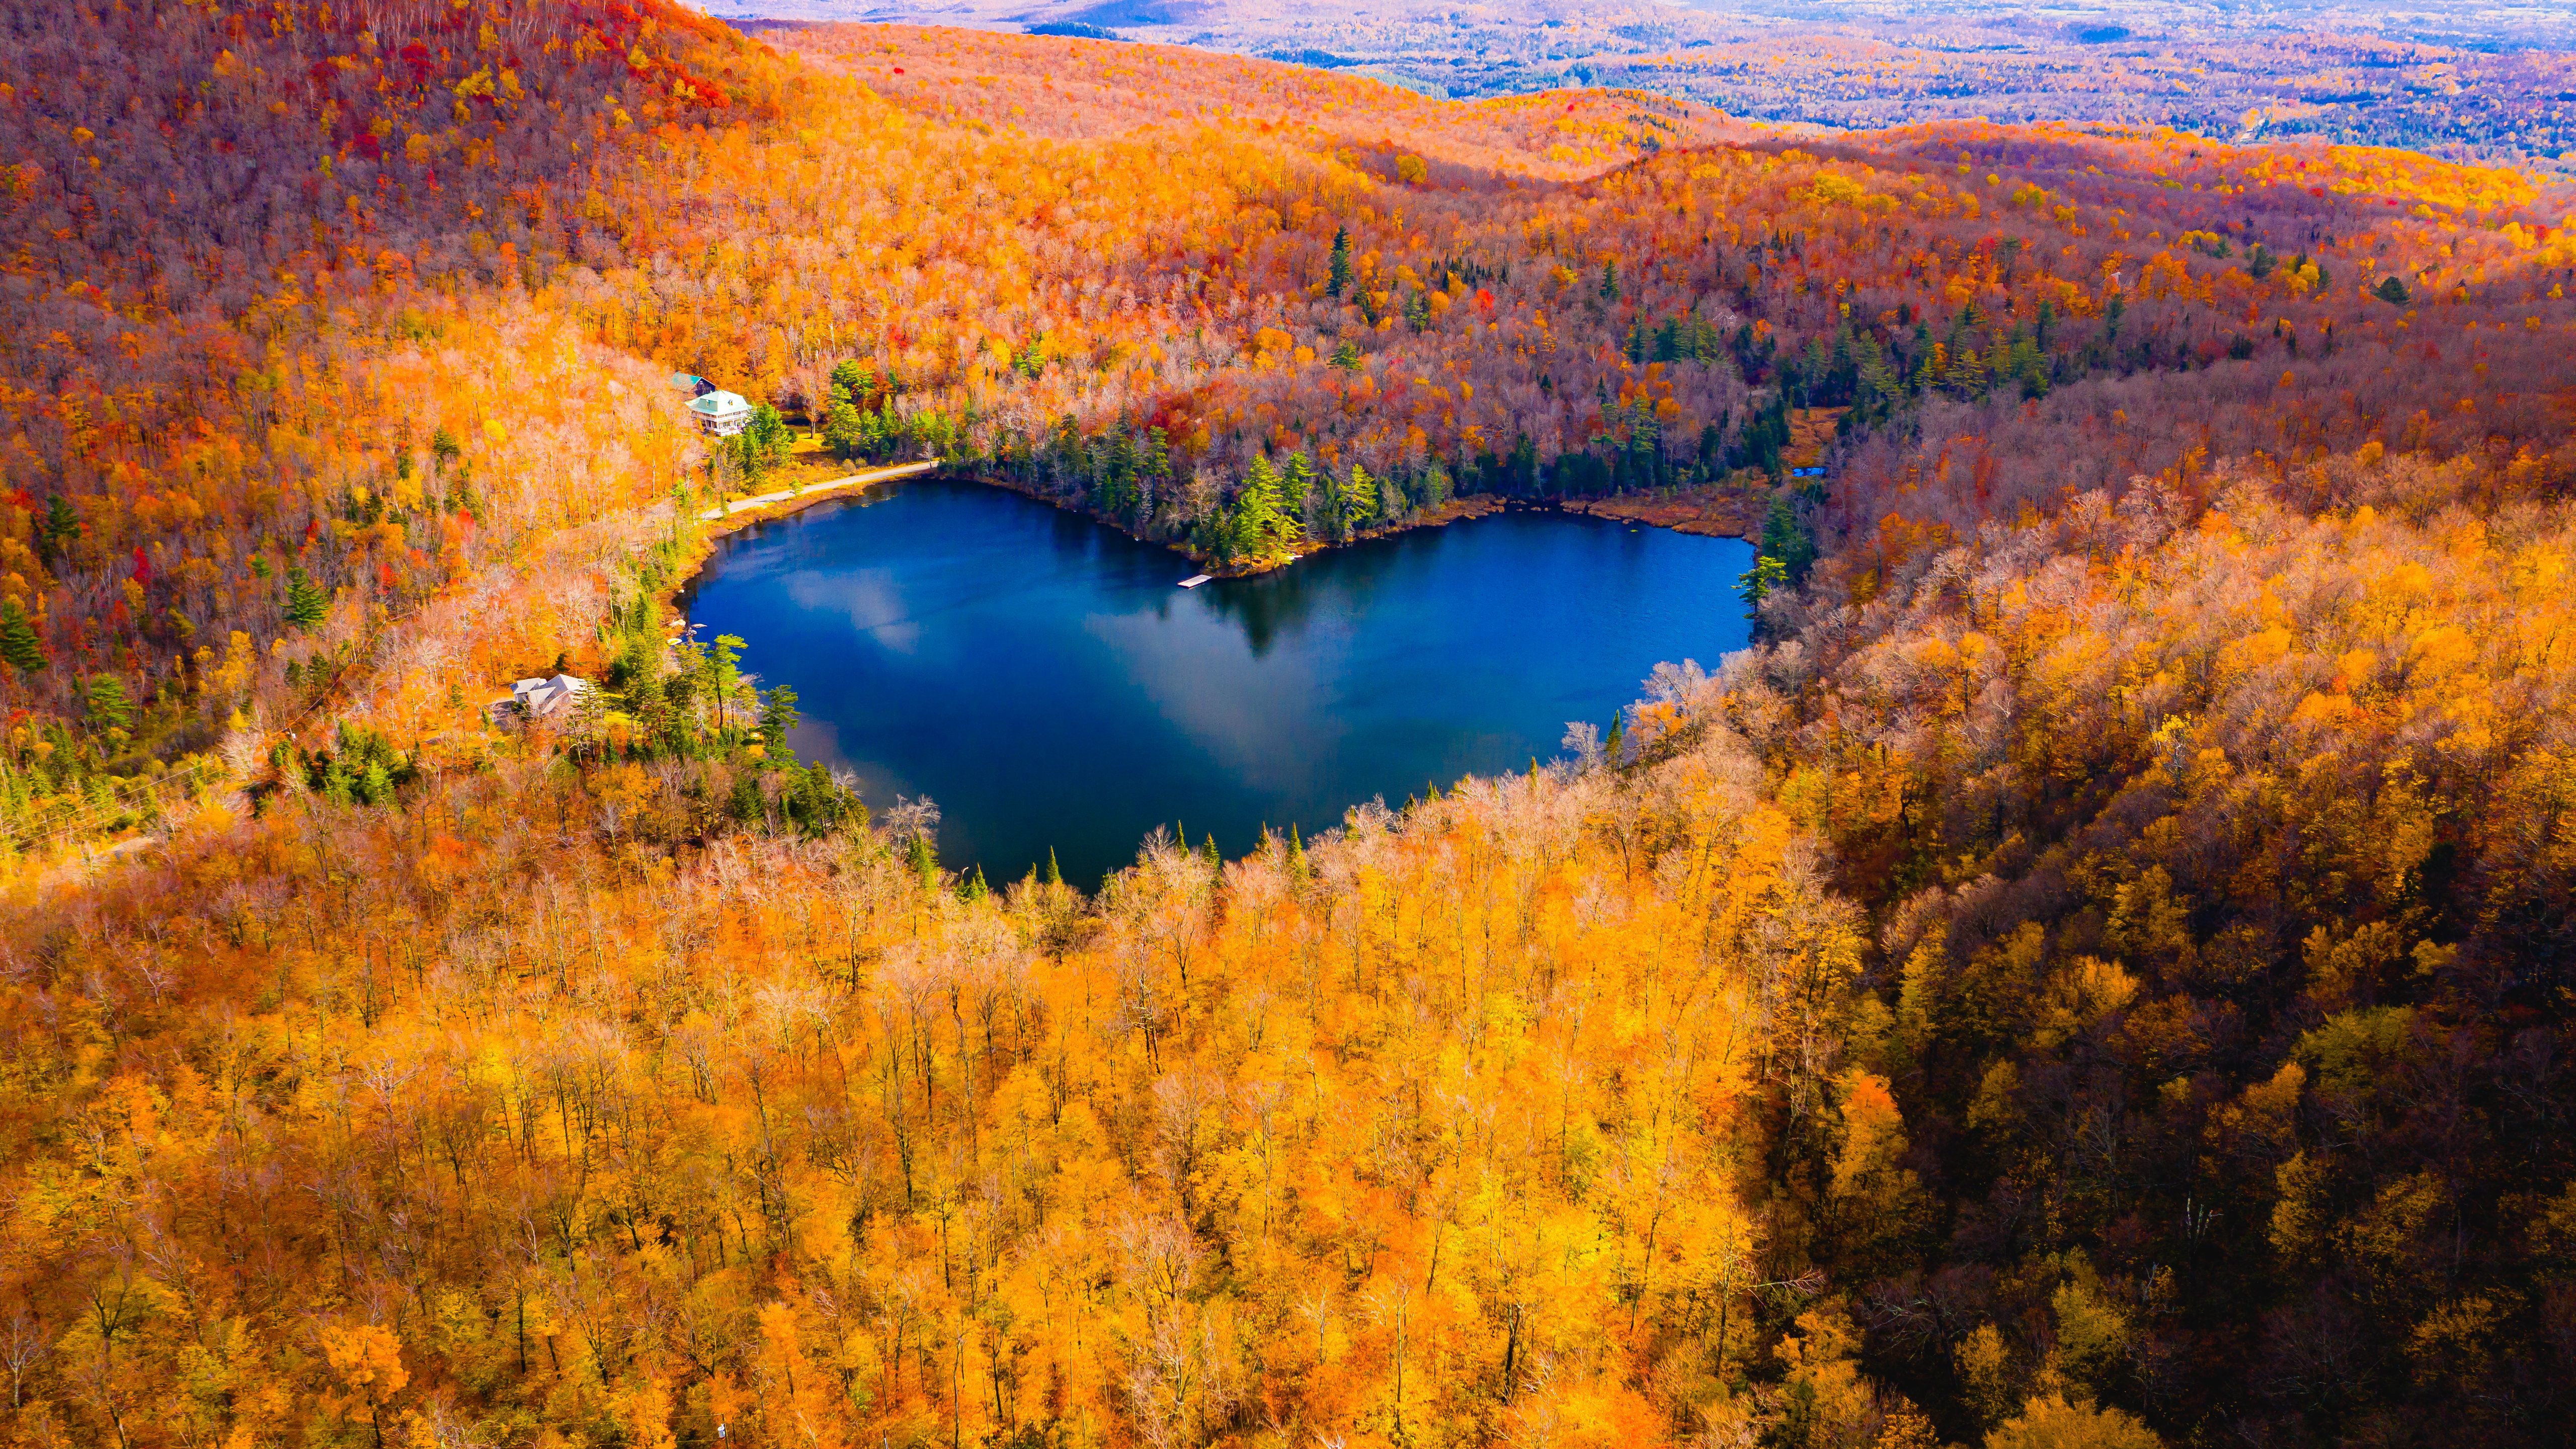 A heart shaped lake surrounded by trees in the fall - Lake